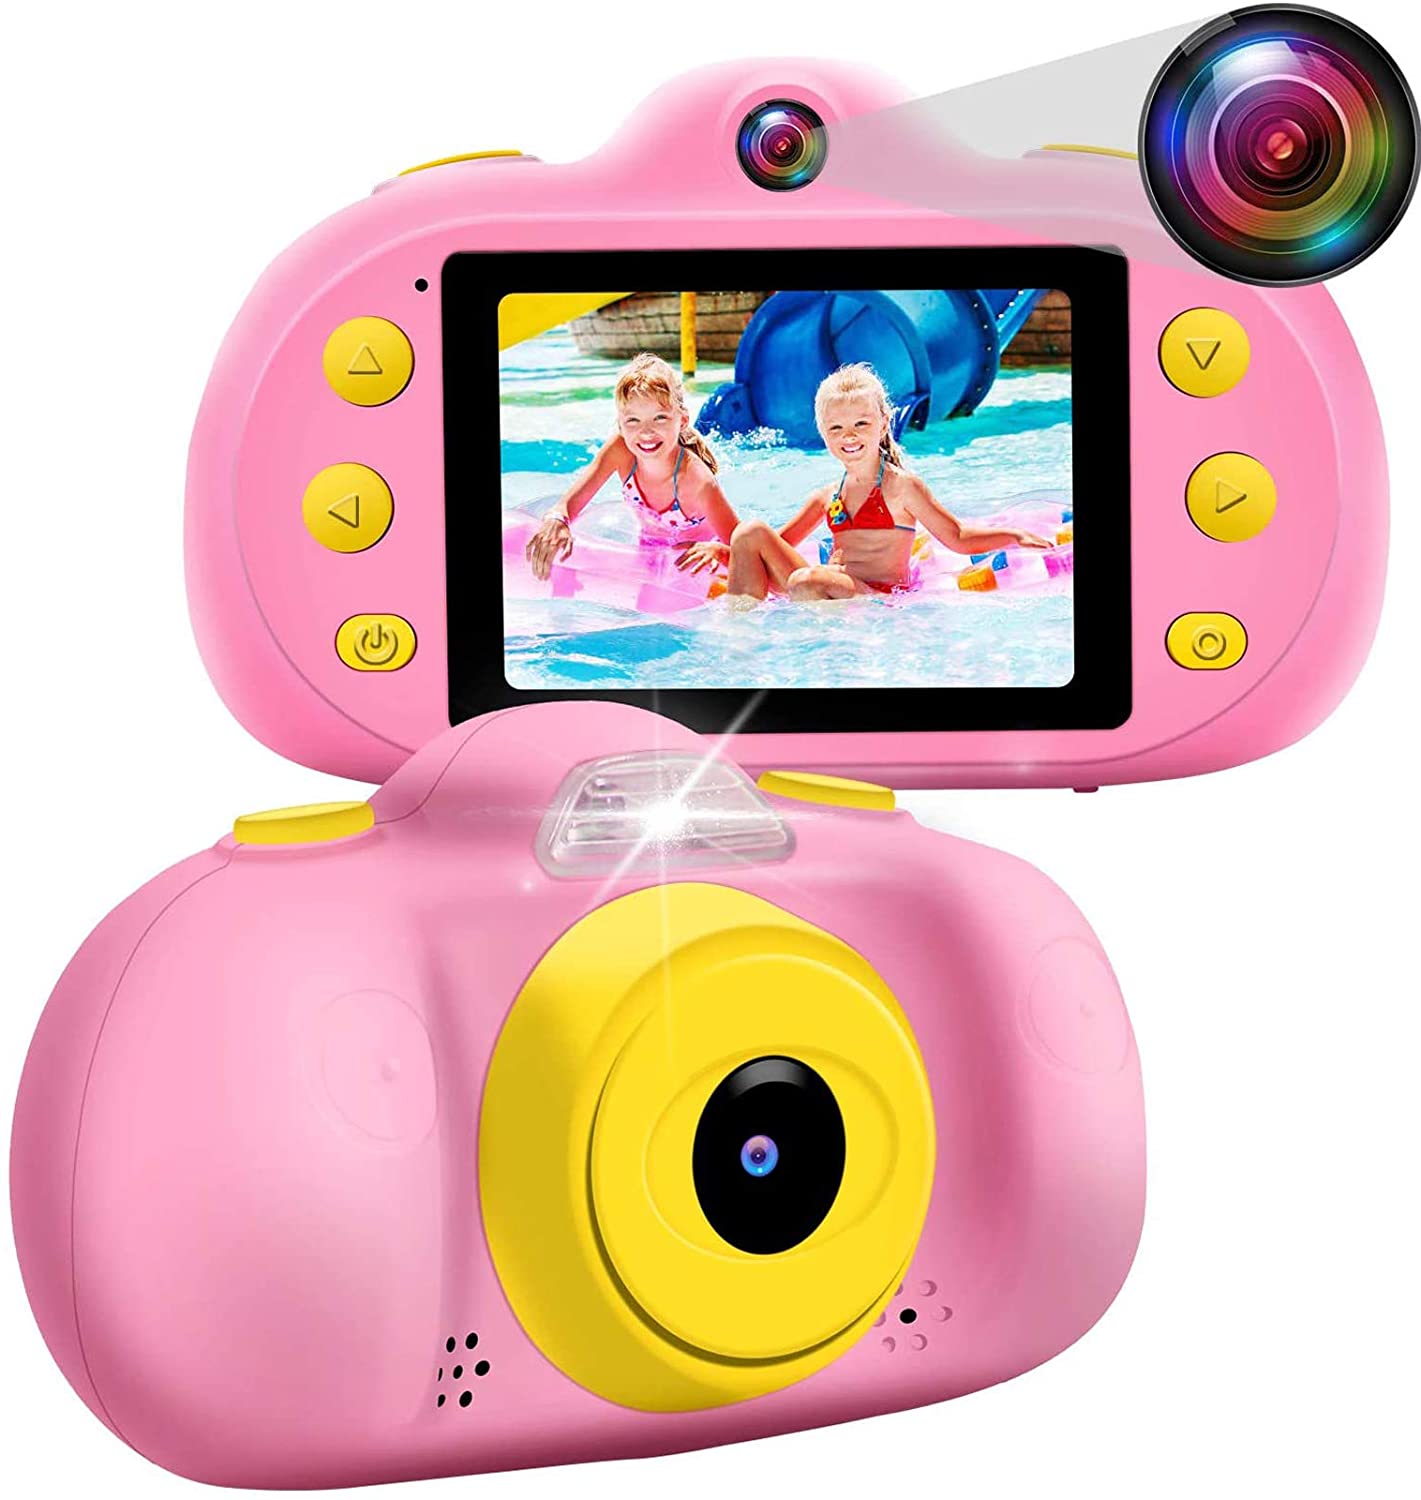 Kids Camera for Girls Boys Toddlers, 1080P FHD Selfie Digital Camera 12 MP DUAL Lens Selfie Camera Shockproof Children Camera with Puzzle Game/MP3, Children Birthday Holiday Toy Gifts (16GB S - Home Decor Gifts and More